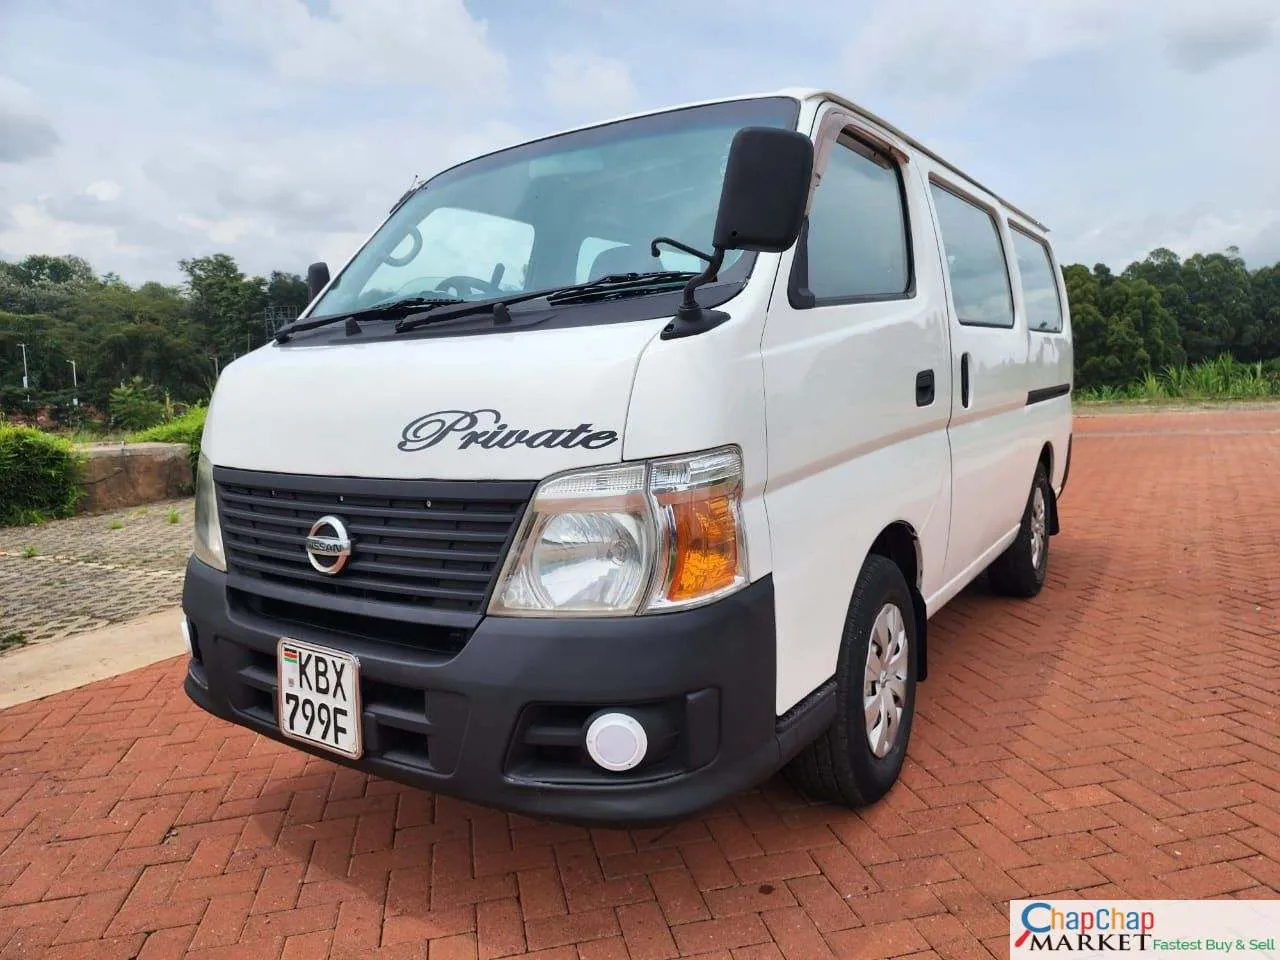 Cars Cars For Sale-Nissan caravan for sale in Kenya QUICK SALE urvan van You Pay 40% Deposit Trade in Ok EXCLUSIVE hire purchase installments SOLD 9